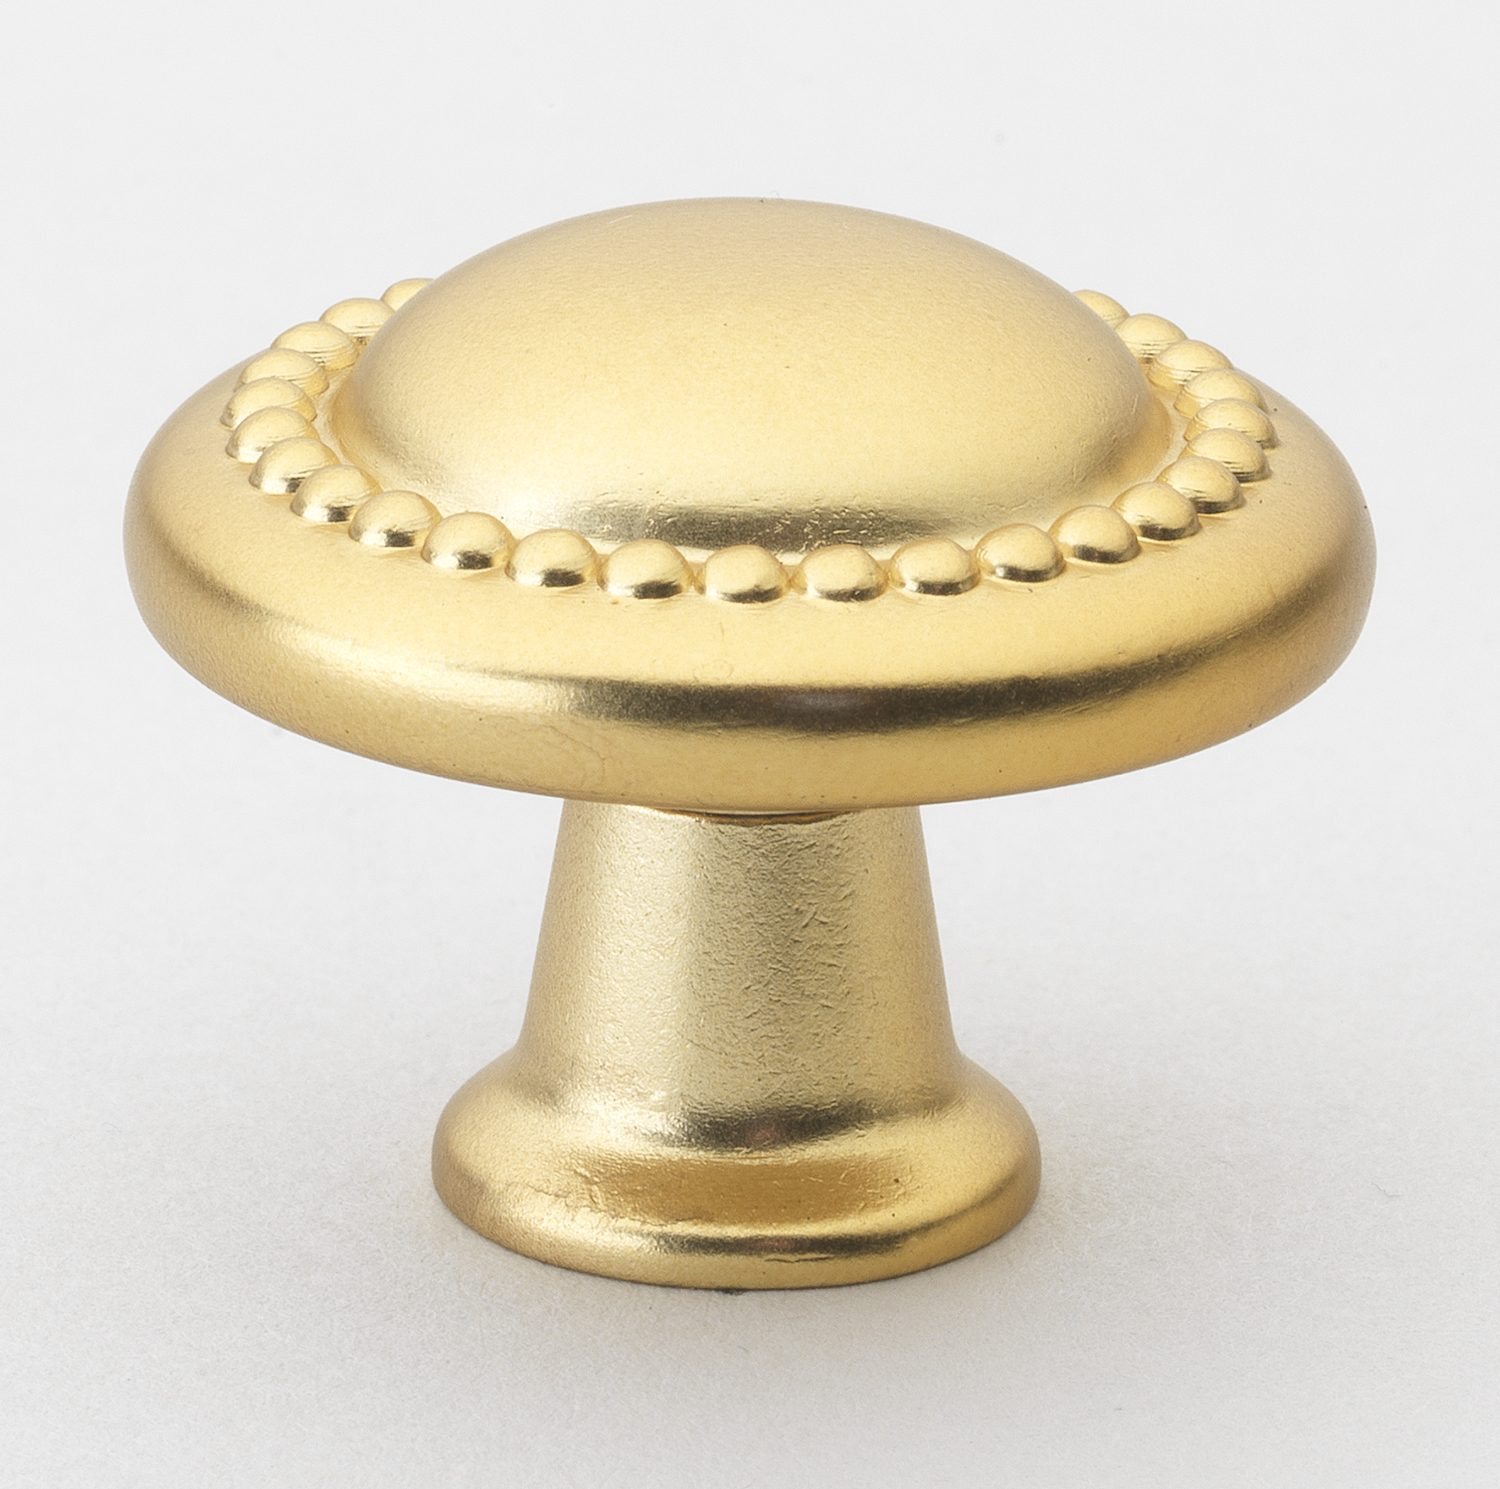 Solid Brass Cabinet Knobs, Knobs For Cabinets